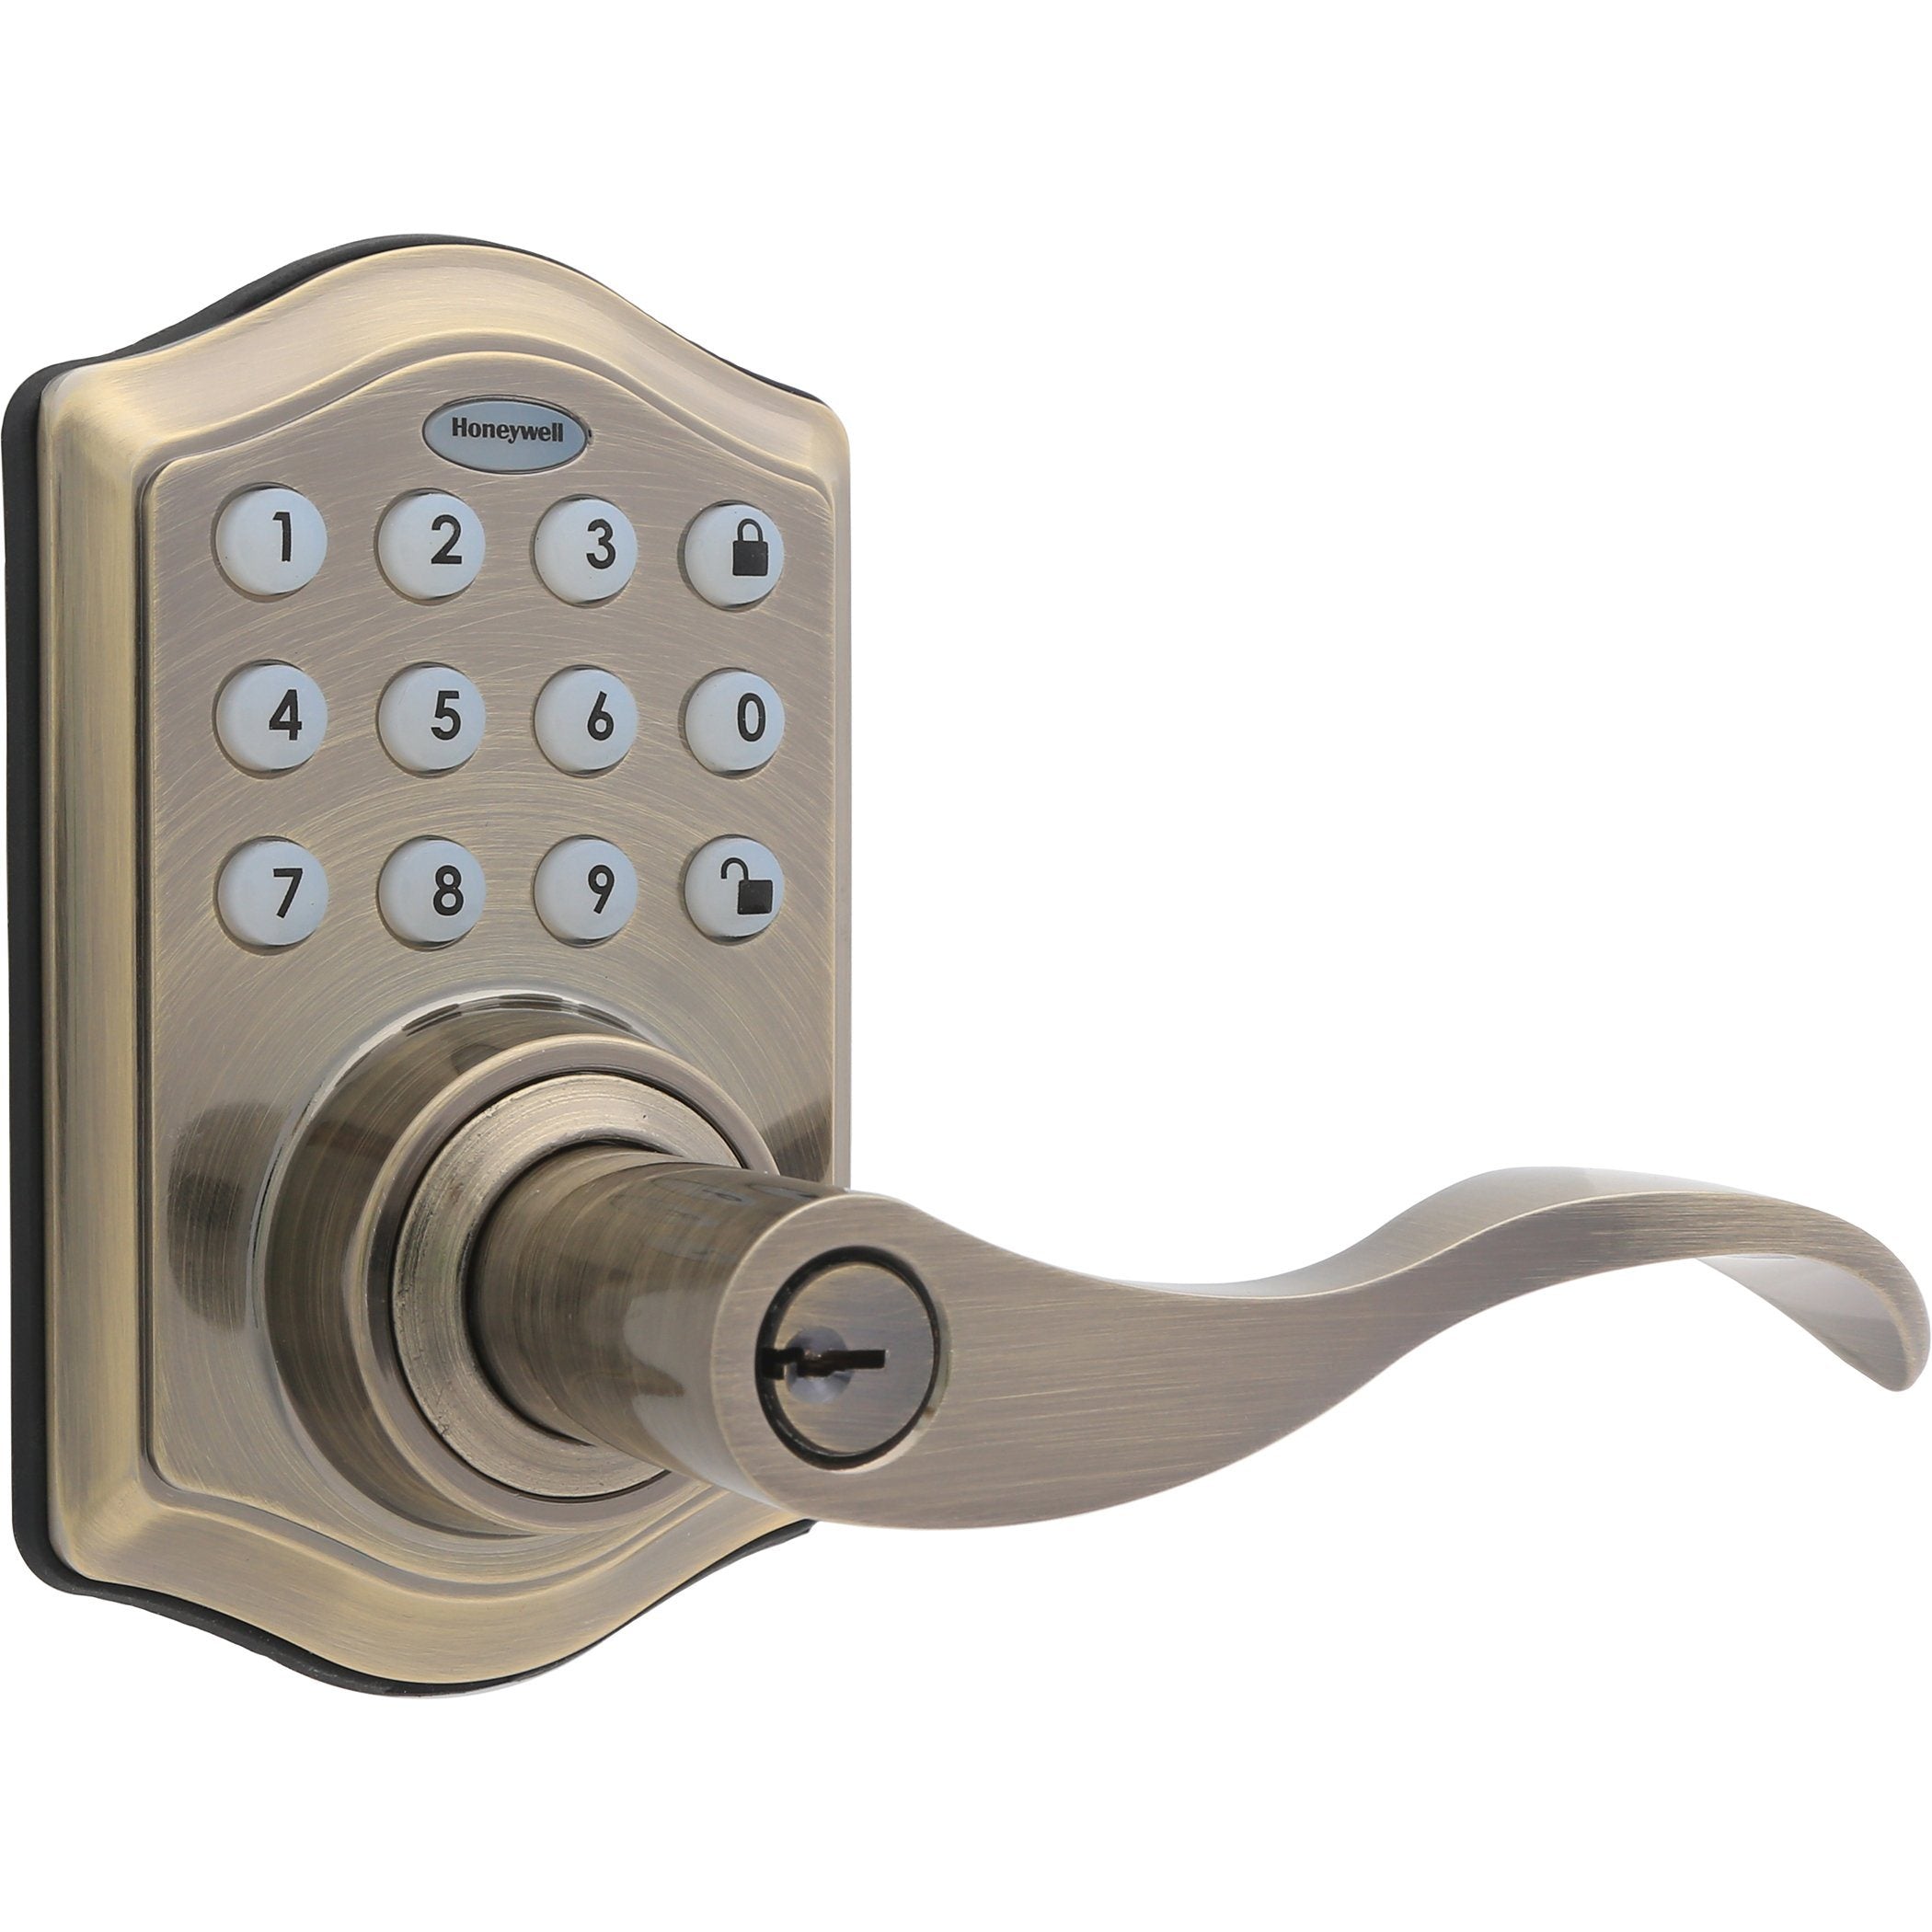 Honeywell 8734101 Electronic Entry Lever Door Lock with Keypad in Antique Brass